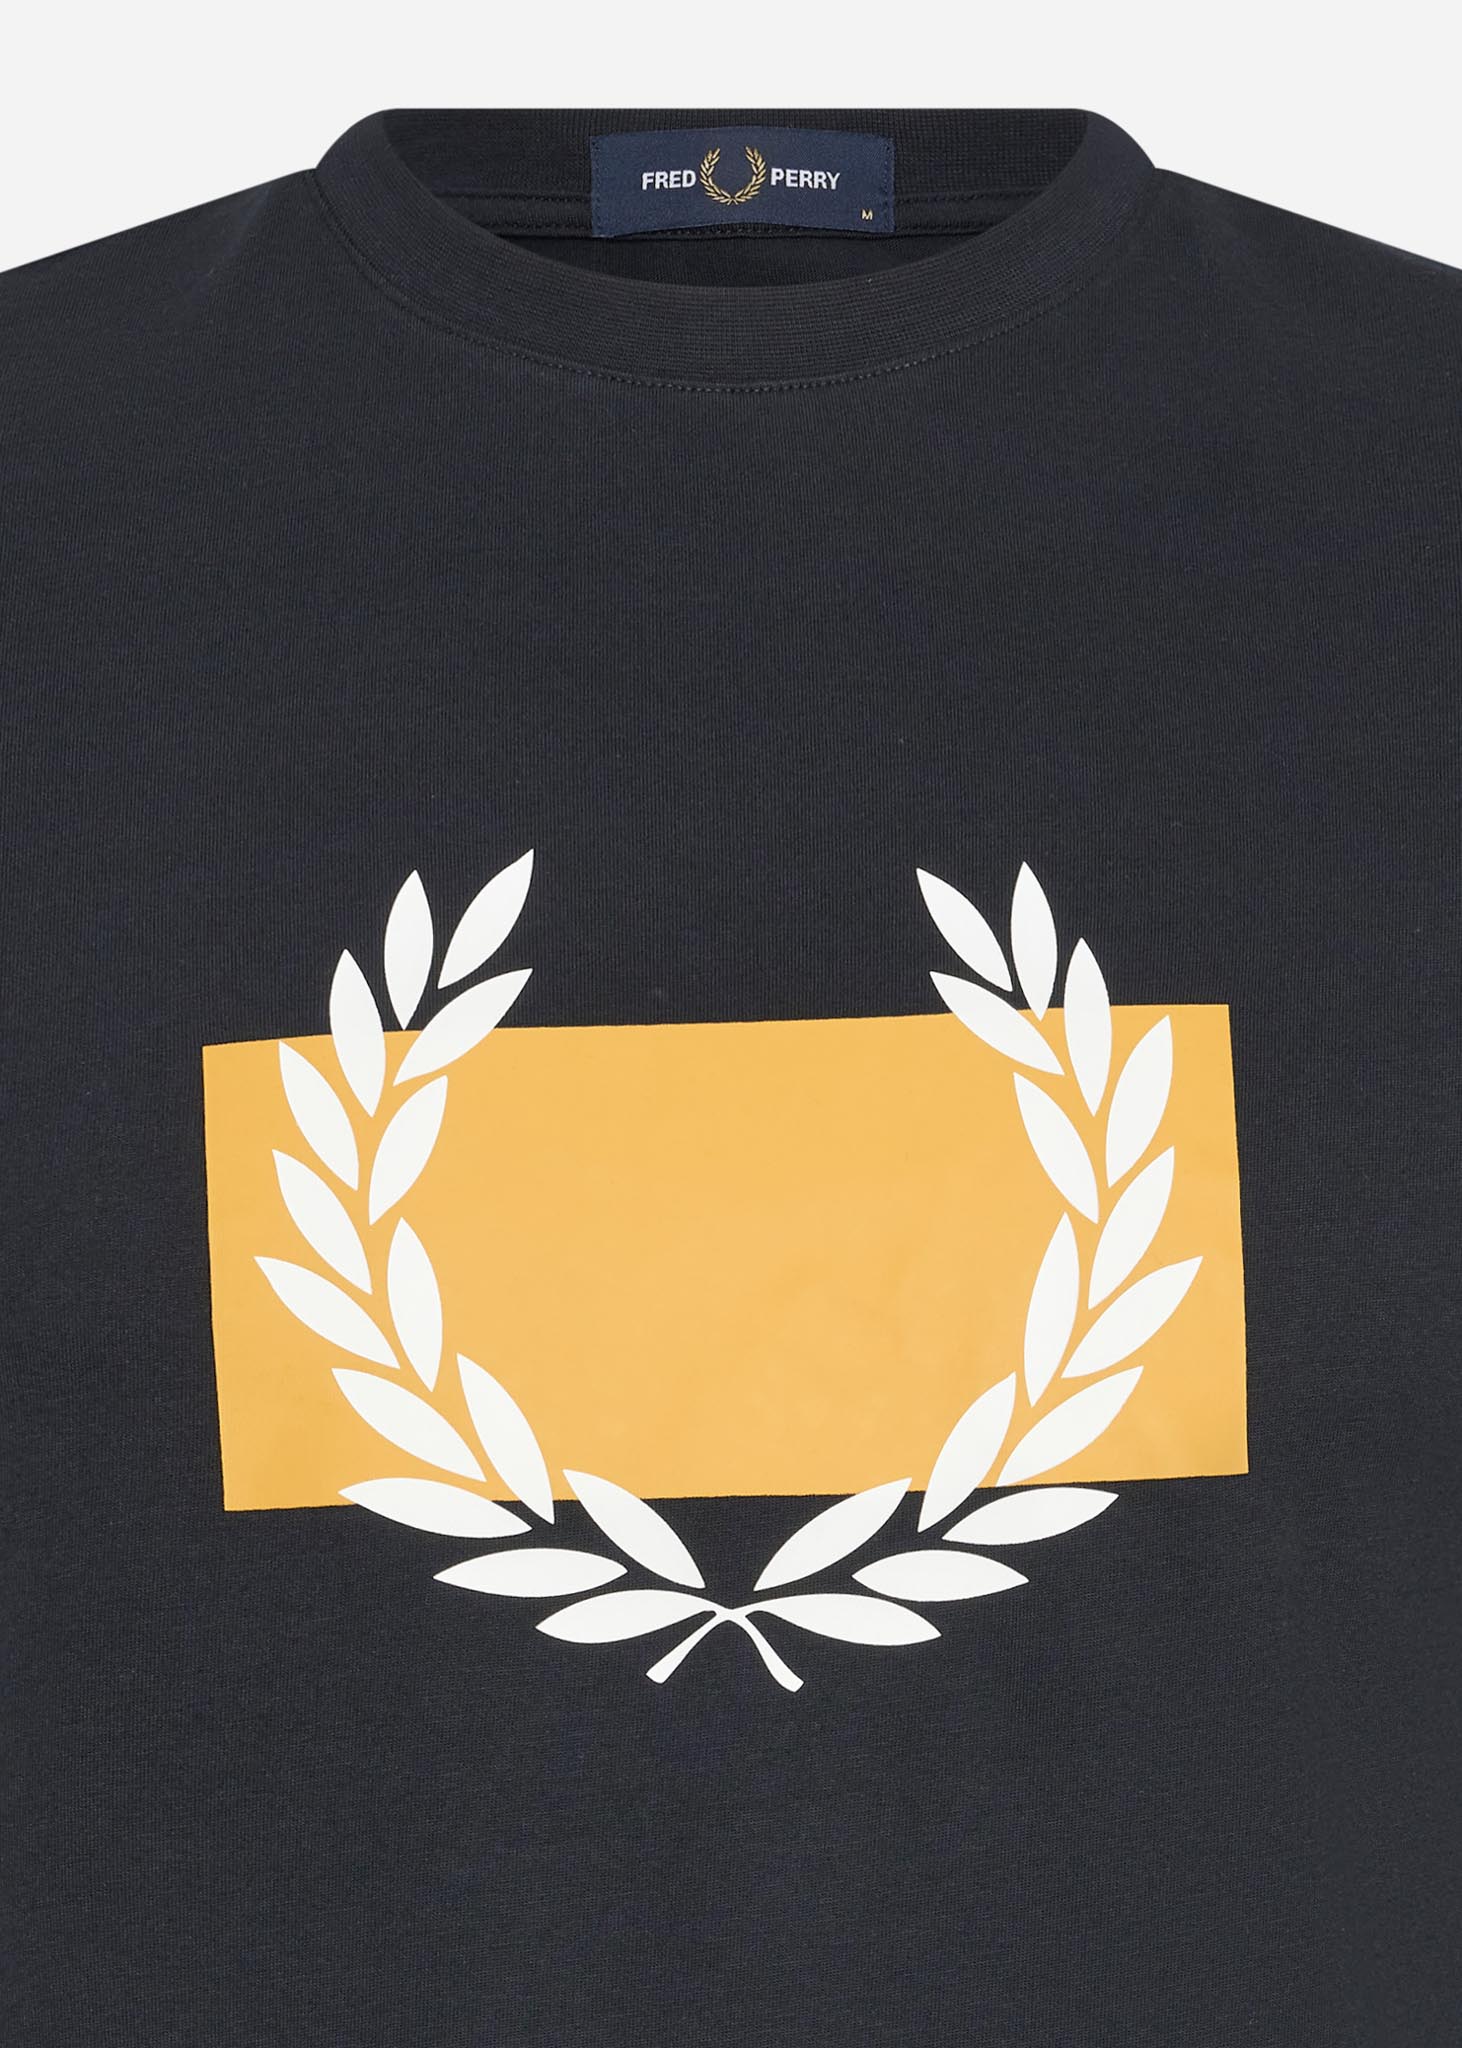 Fred Perry T-shirts  Laurel wreath print t-shirt - navy 